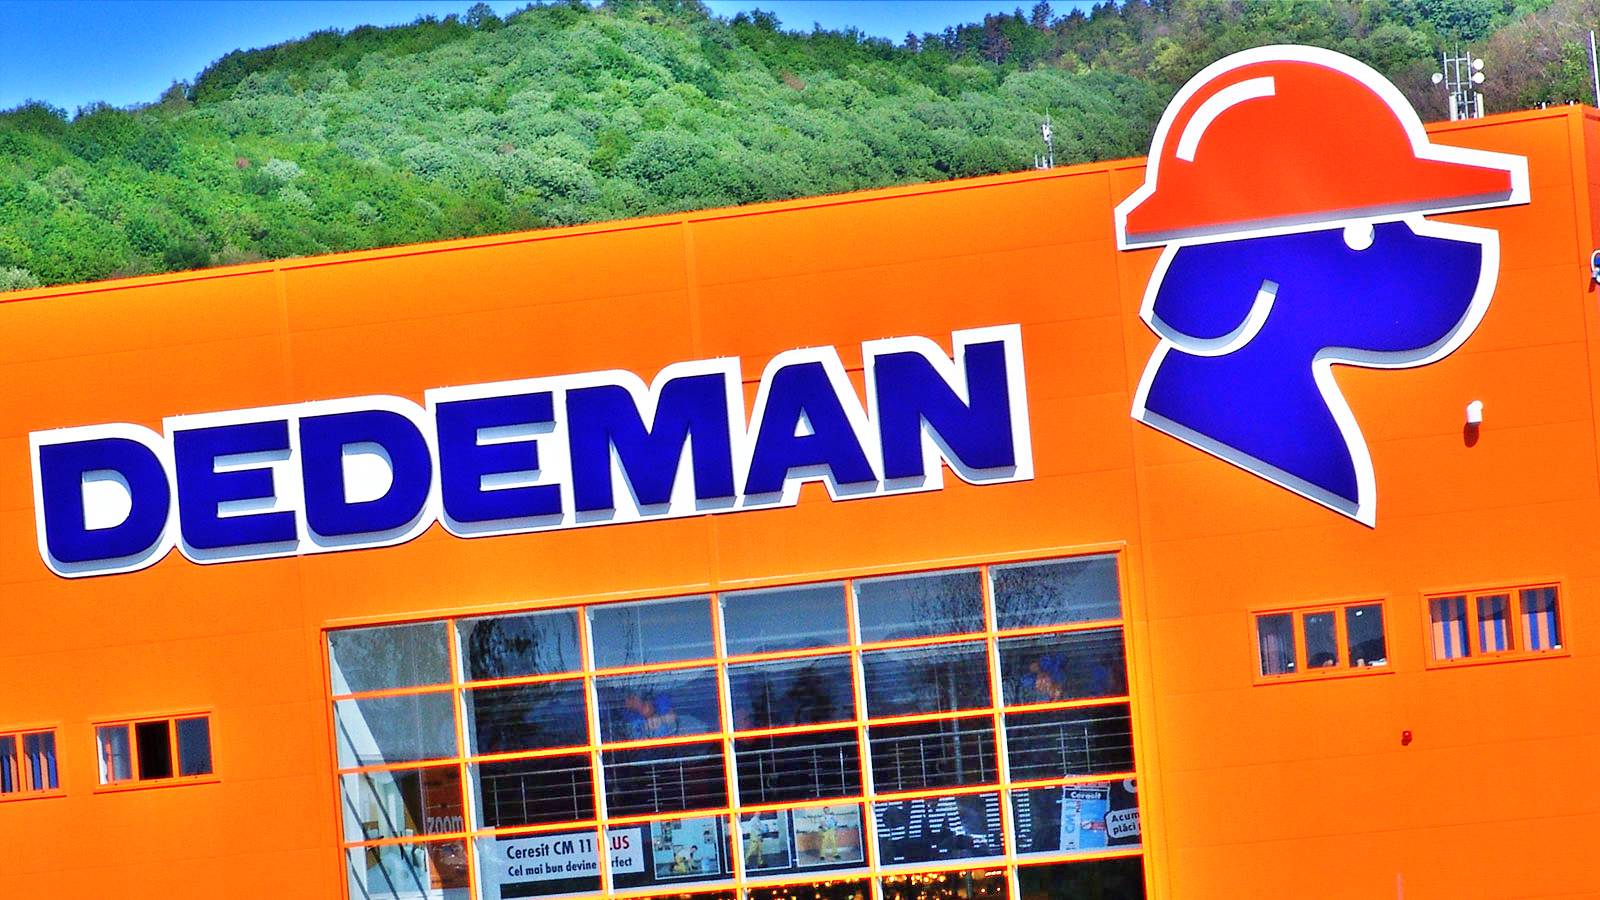 DEDEMAN Officially Informs Customers IMPORTANT Decision Stores